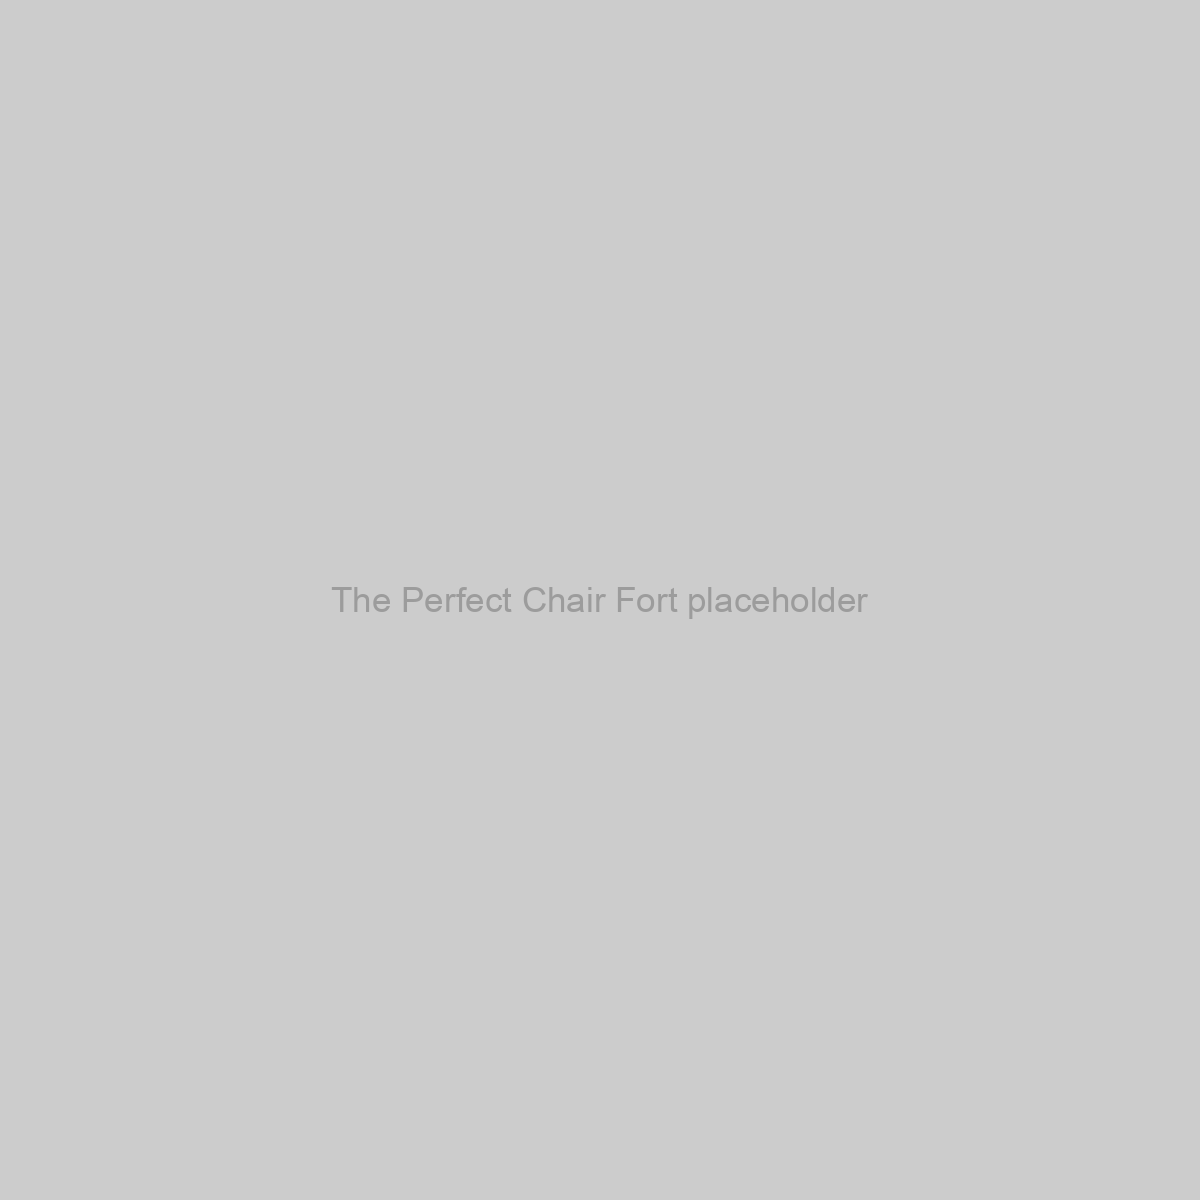 The Perfect Chair Fort Placeholder Image